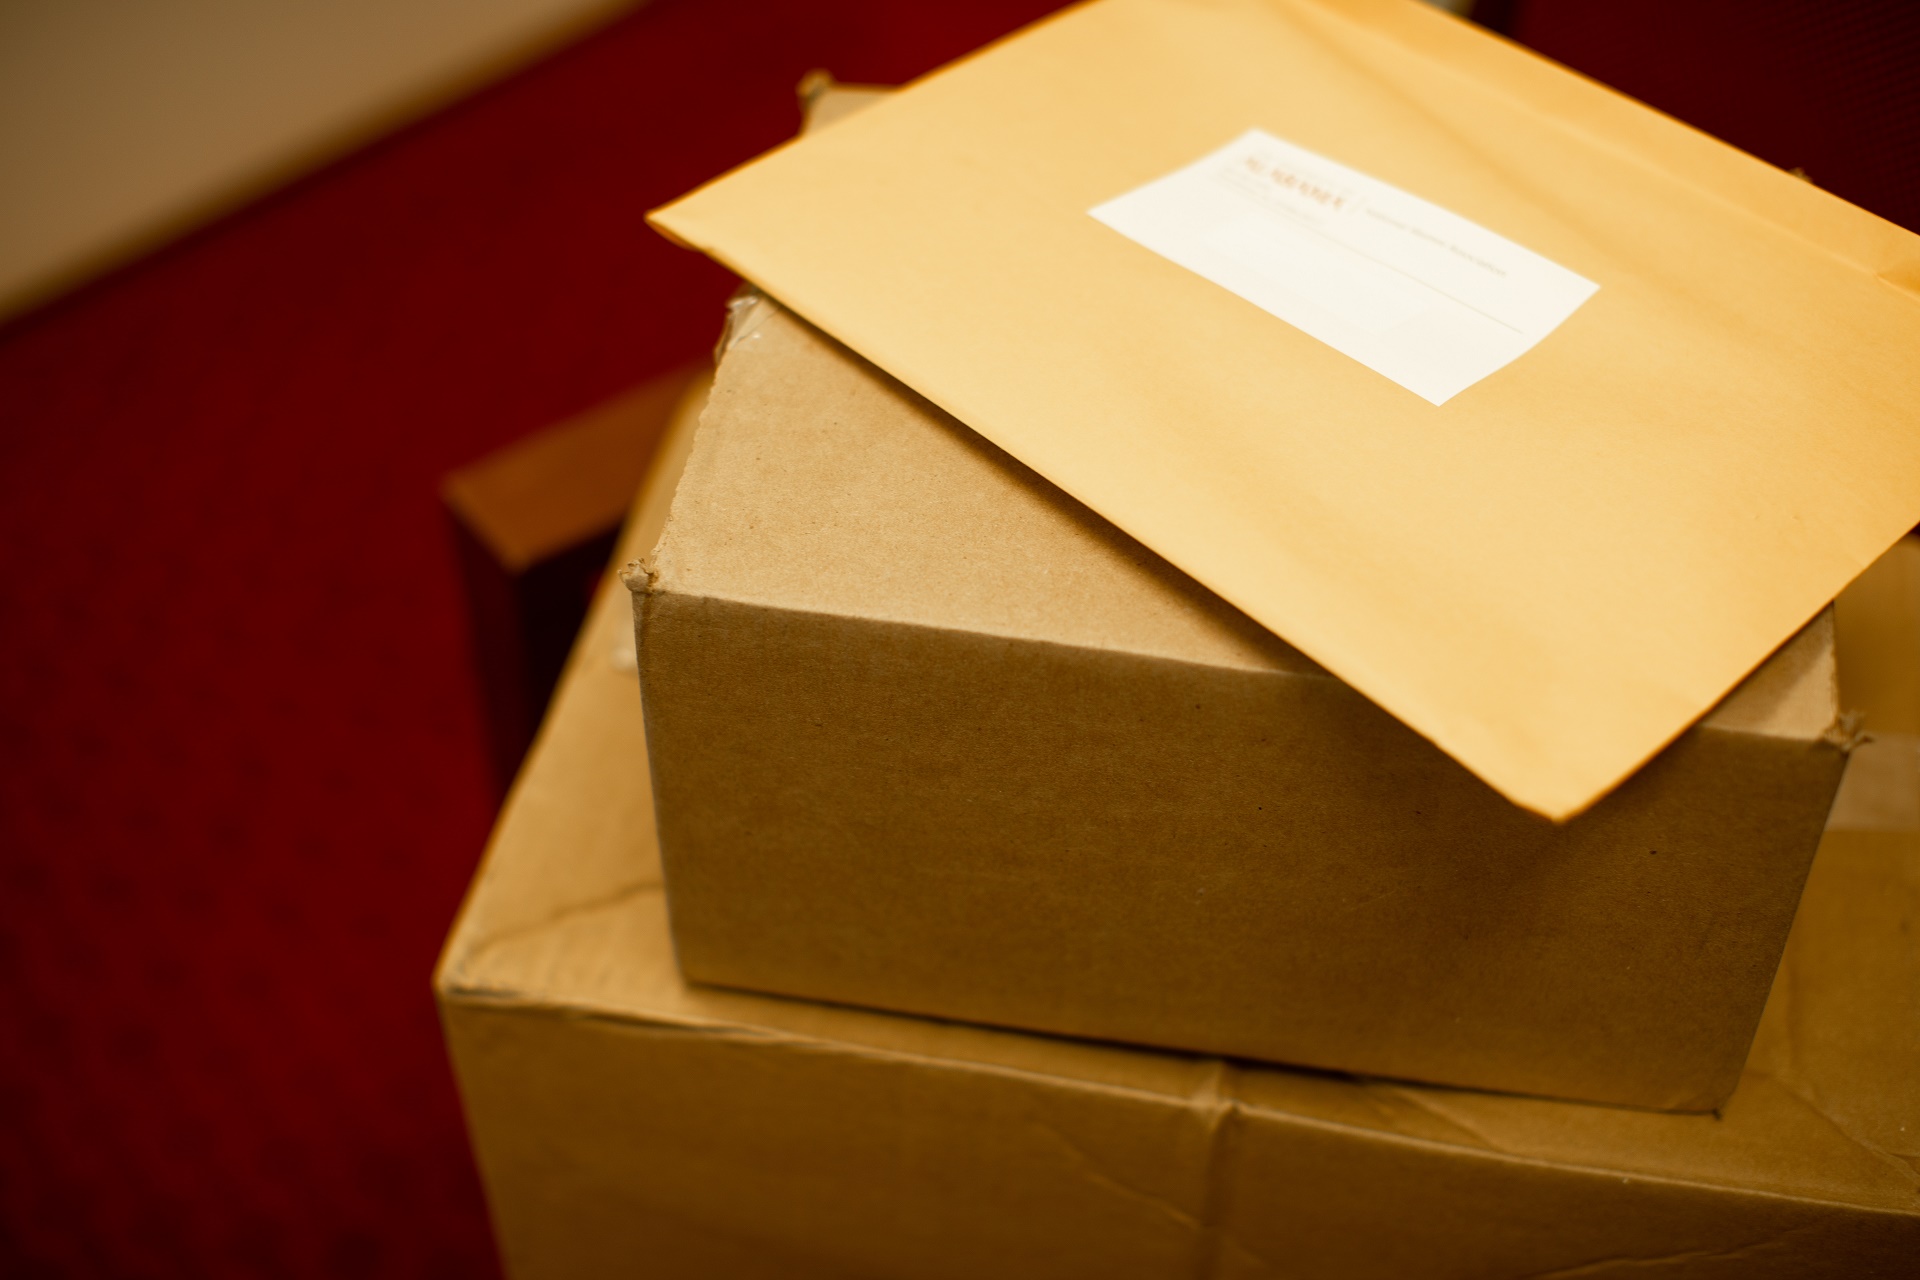 Two packages and an envelope stacked atop one another.